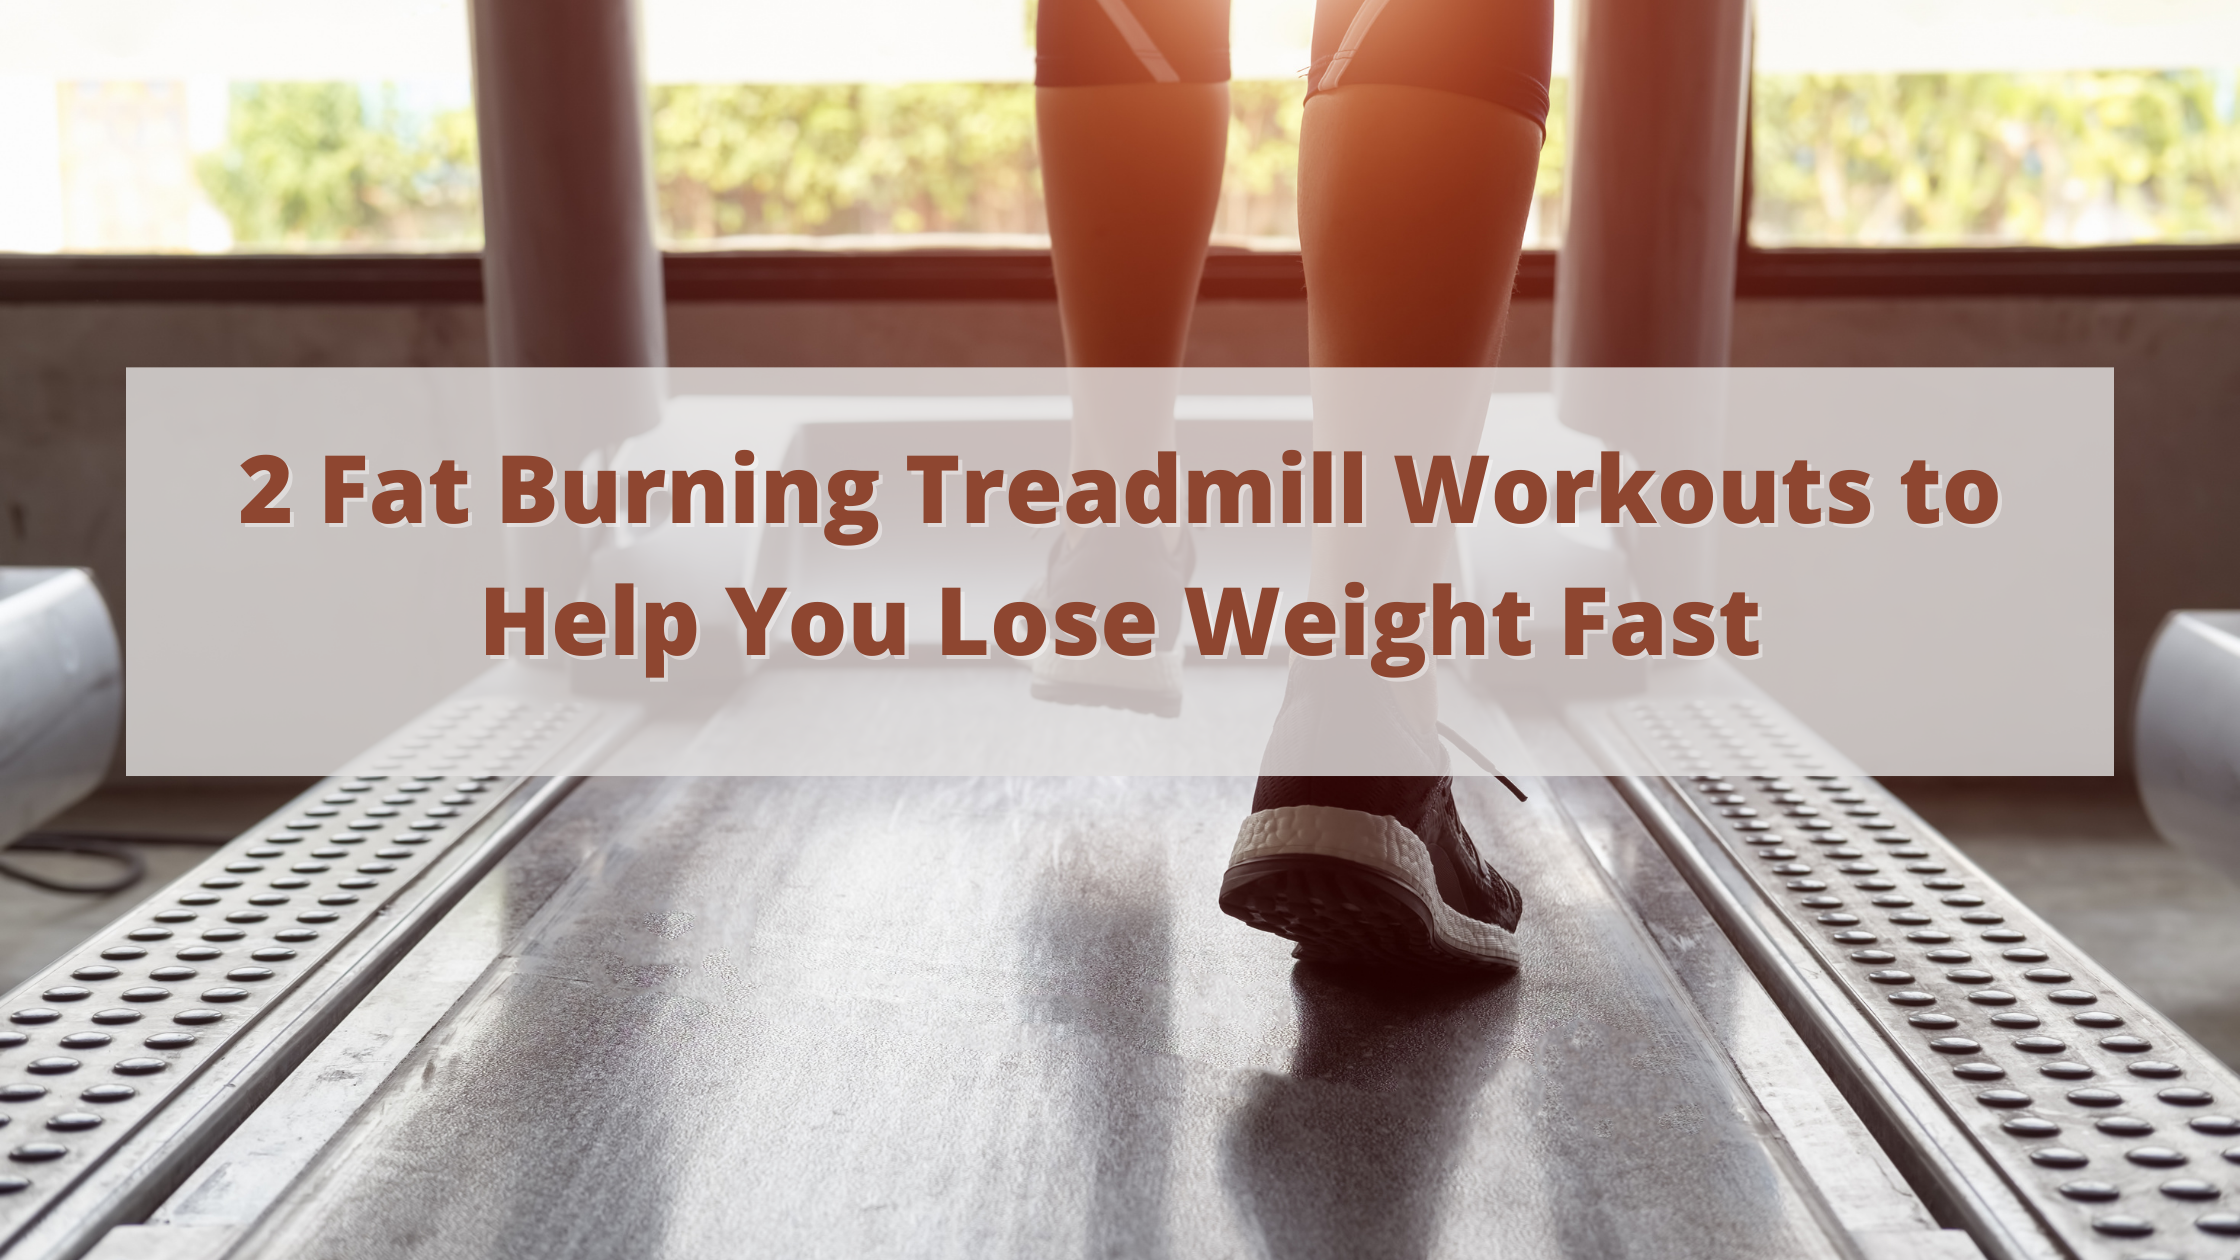 Treadmill Interval Workouts: Treadmill Workouts to Lose Weight Faster